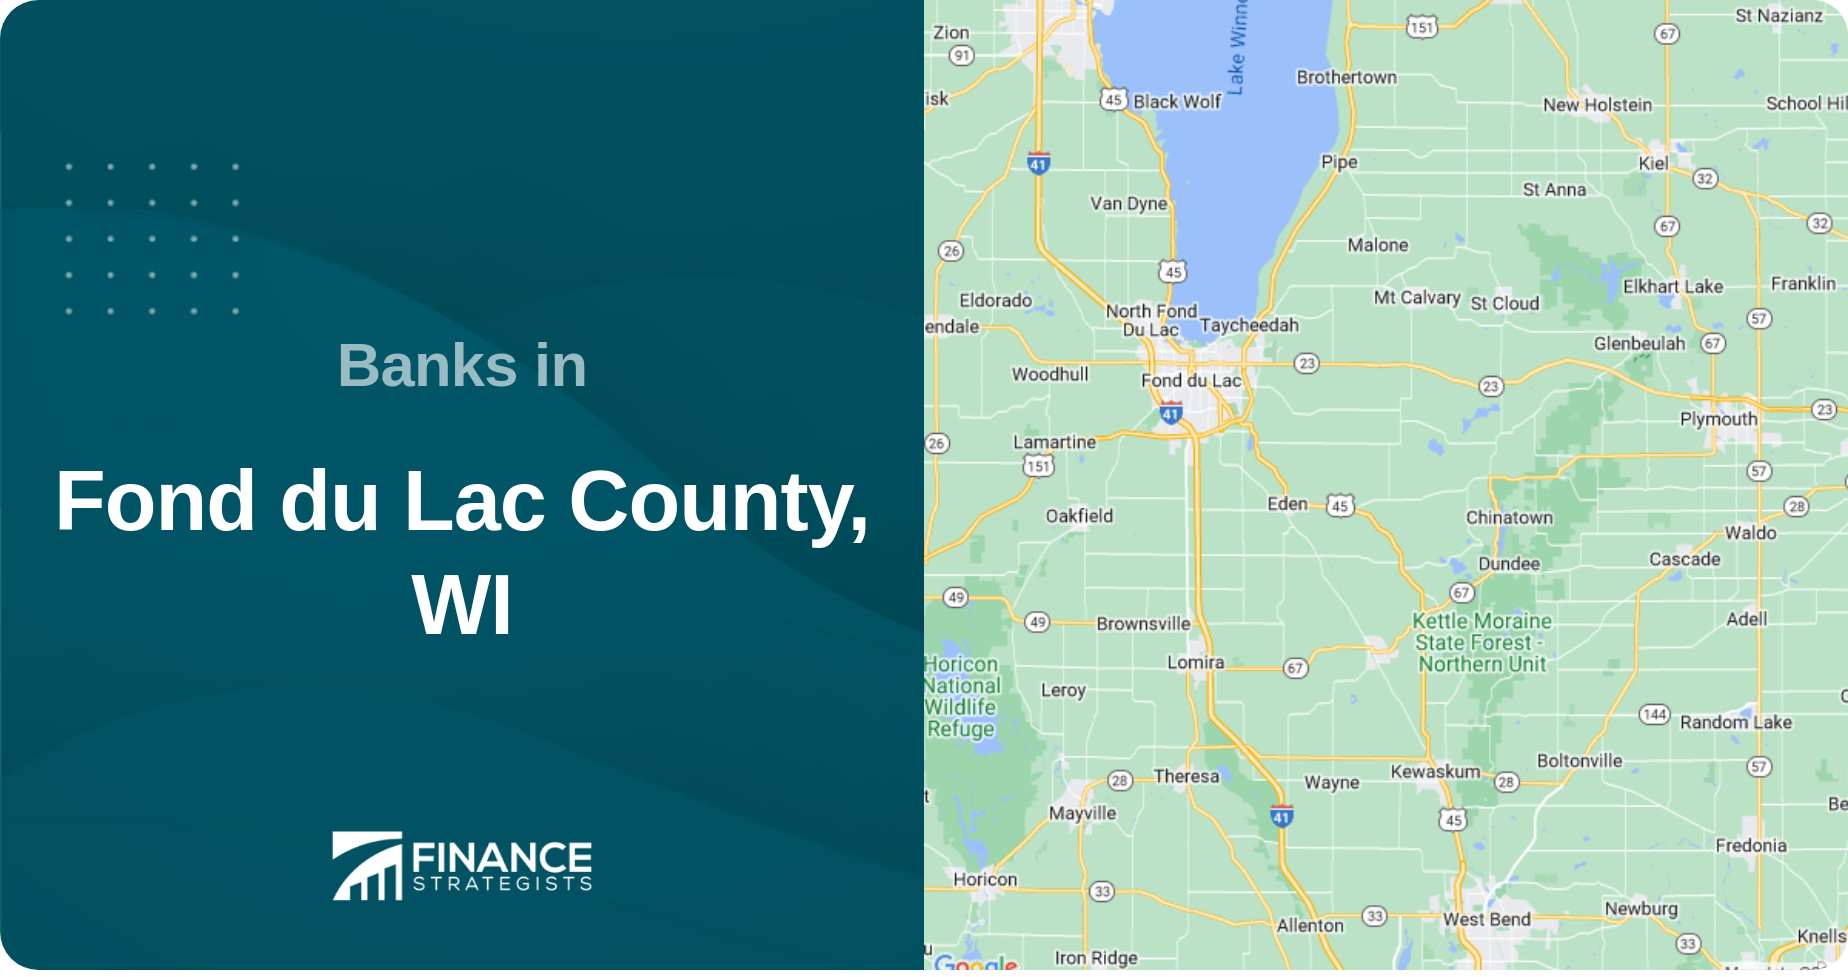 Banks in Fond du Lac County, WI